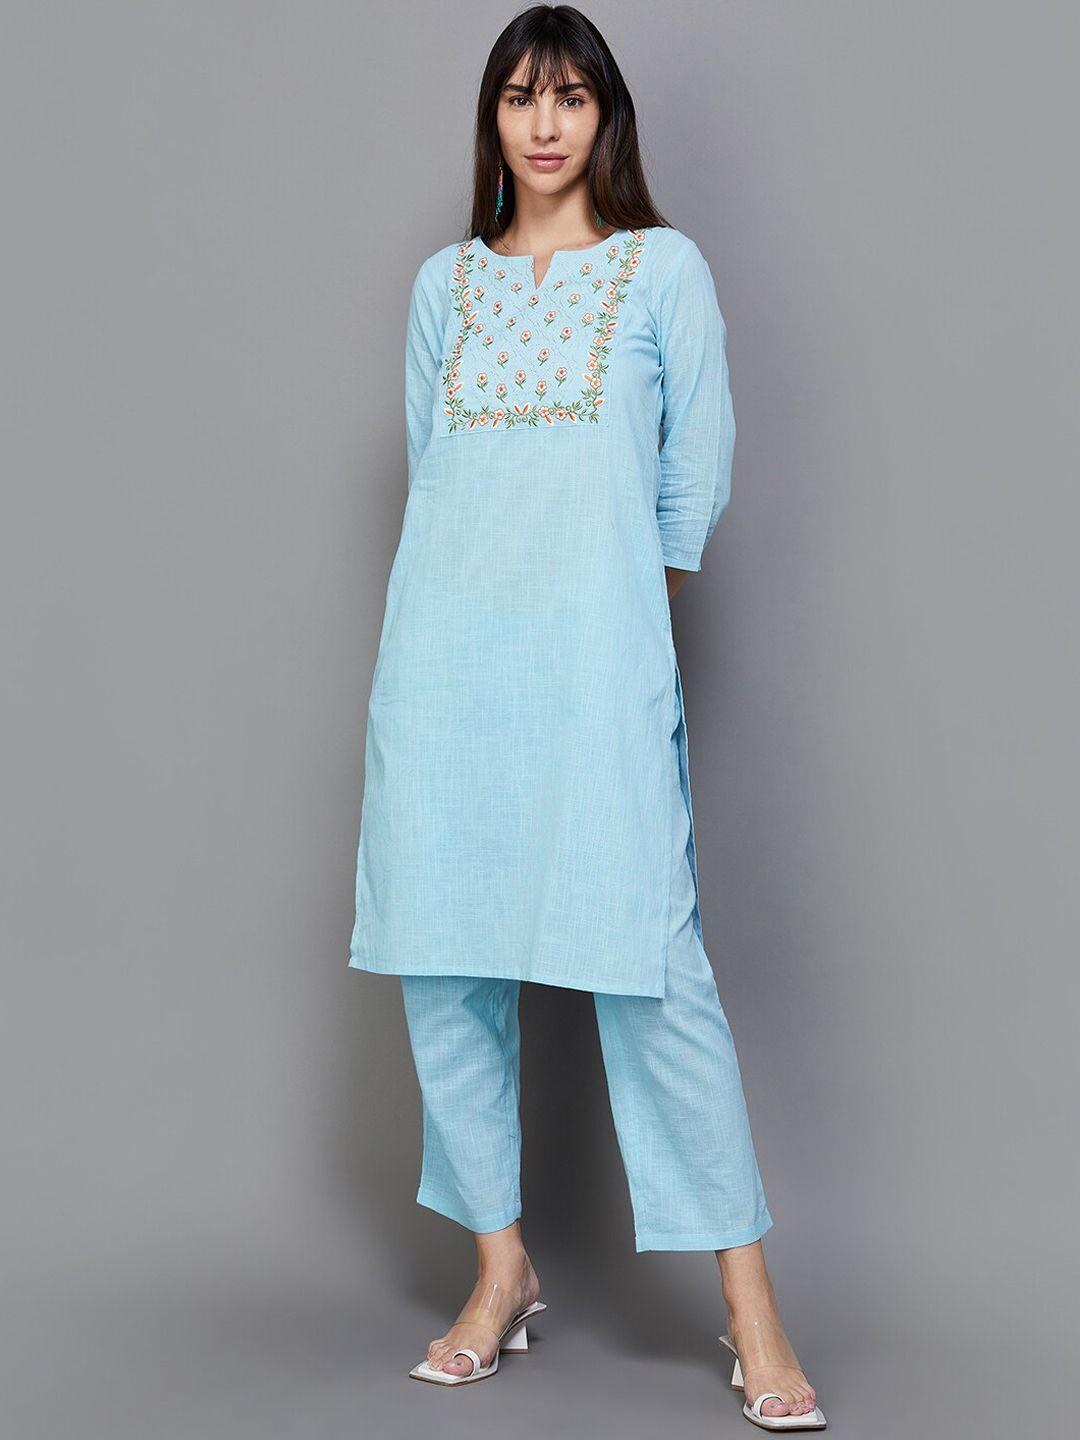 melange-by-lifestyle-floral-yoke-design-thread-work-pure-cotton-kurta-with-trousers